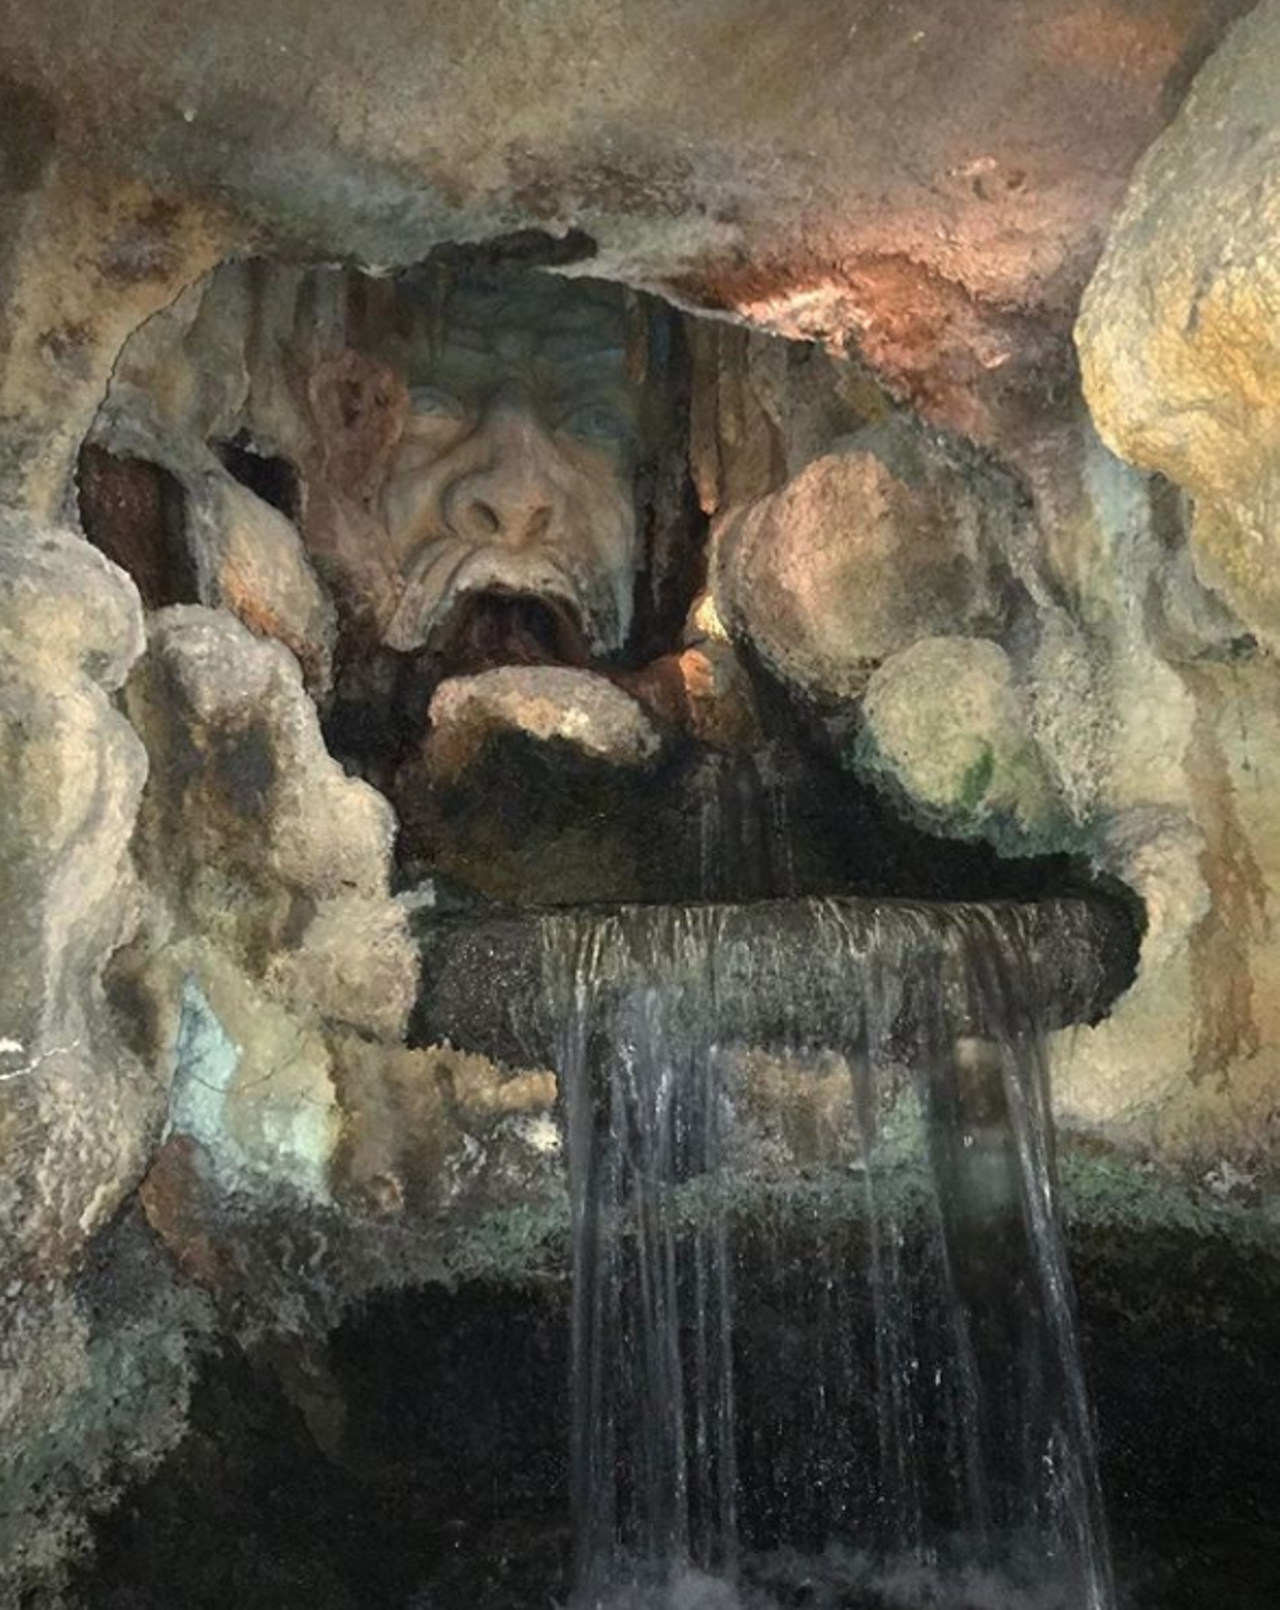 The Grotto
1277 Camden St
Forget about the restaurants and clubs on the River Walk, there’s a true sight awaiting you at the Grotto. You can see small waterfalls and a creepy as hell face in the rocks that make makes for an interesting spot.
Photo via Instagram / dklandez